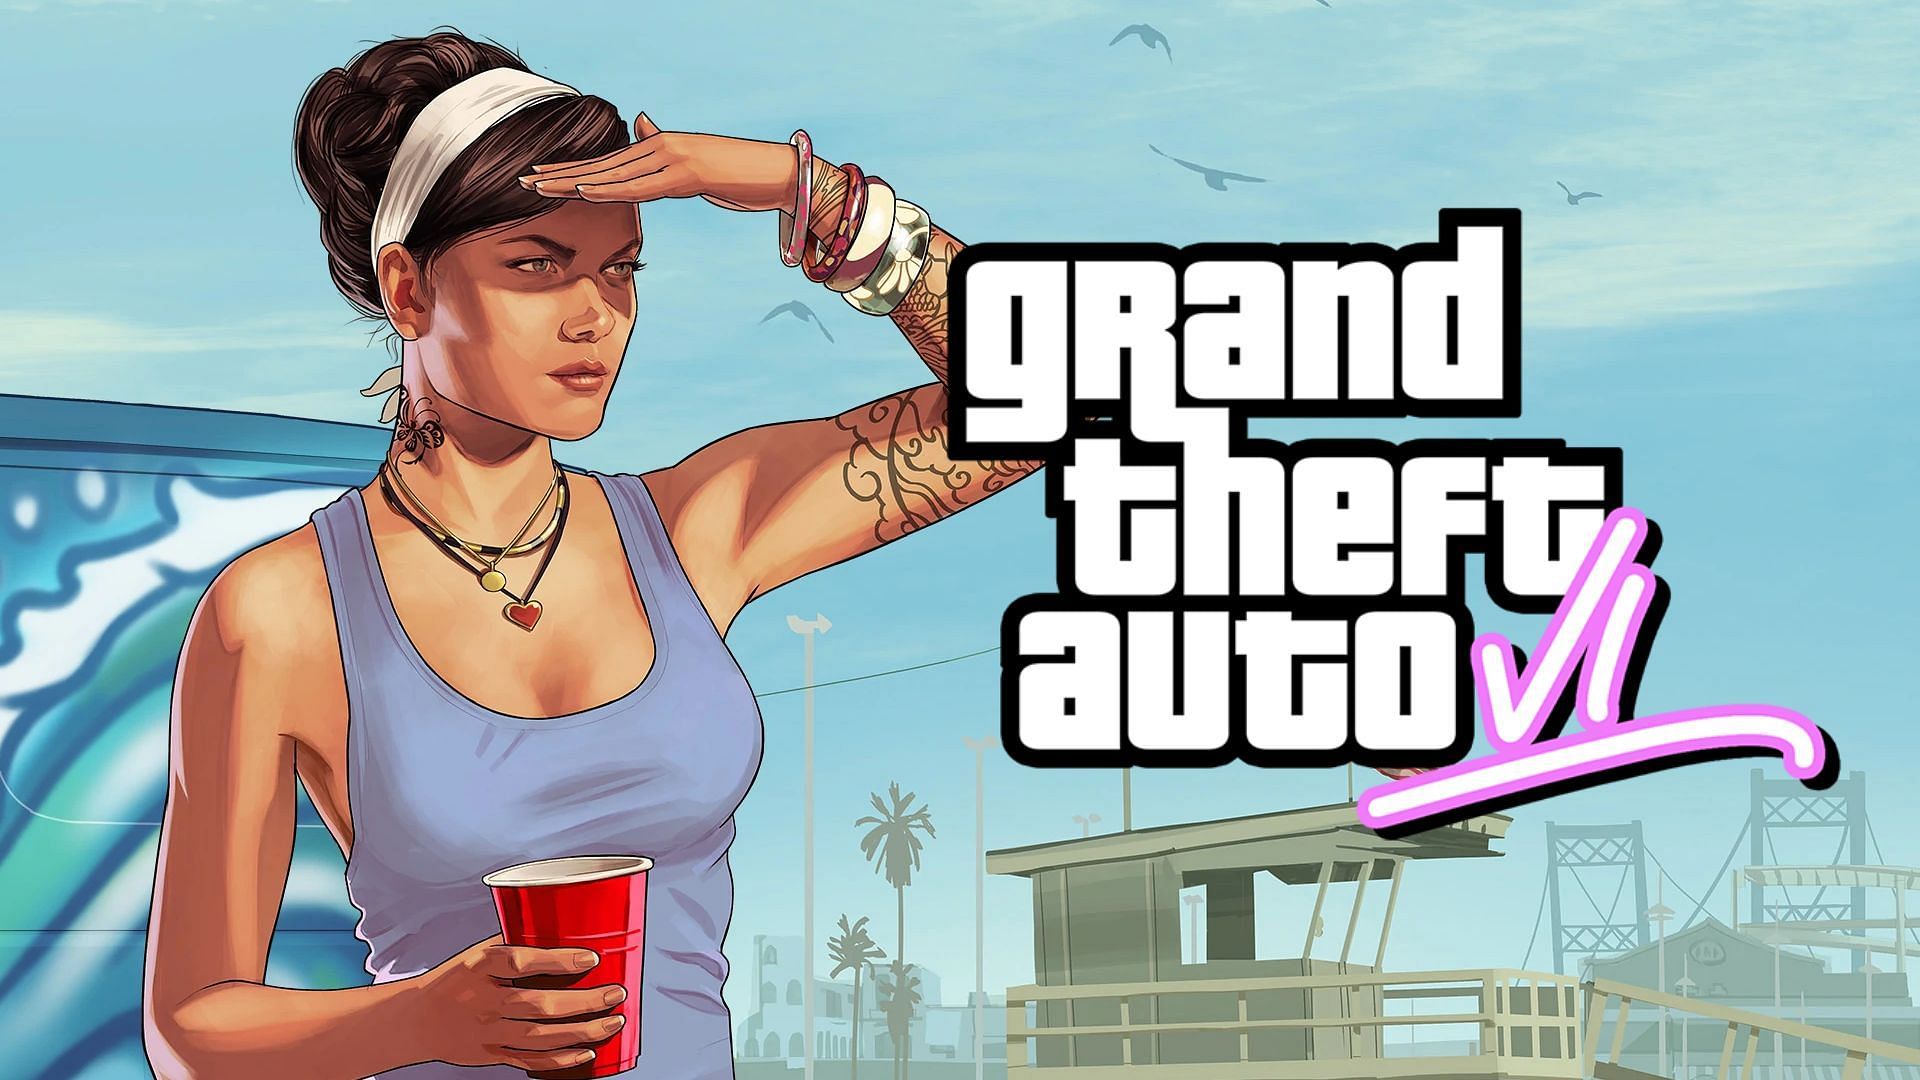 GTA 6 leaked Gameplay Lucia What do you guys think? #gta6leakedfoota, Lucia In White Lotus